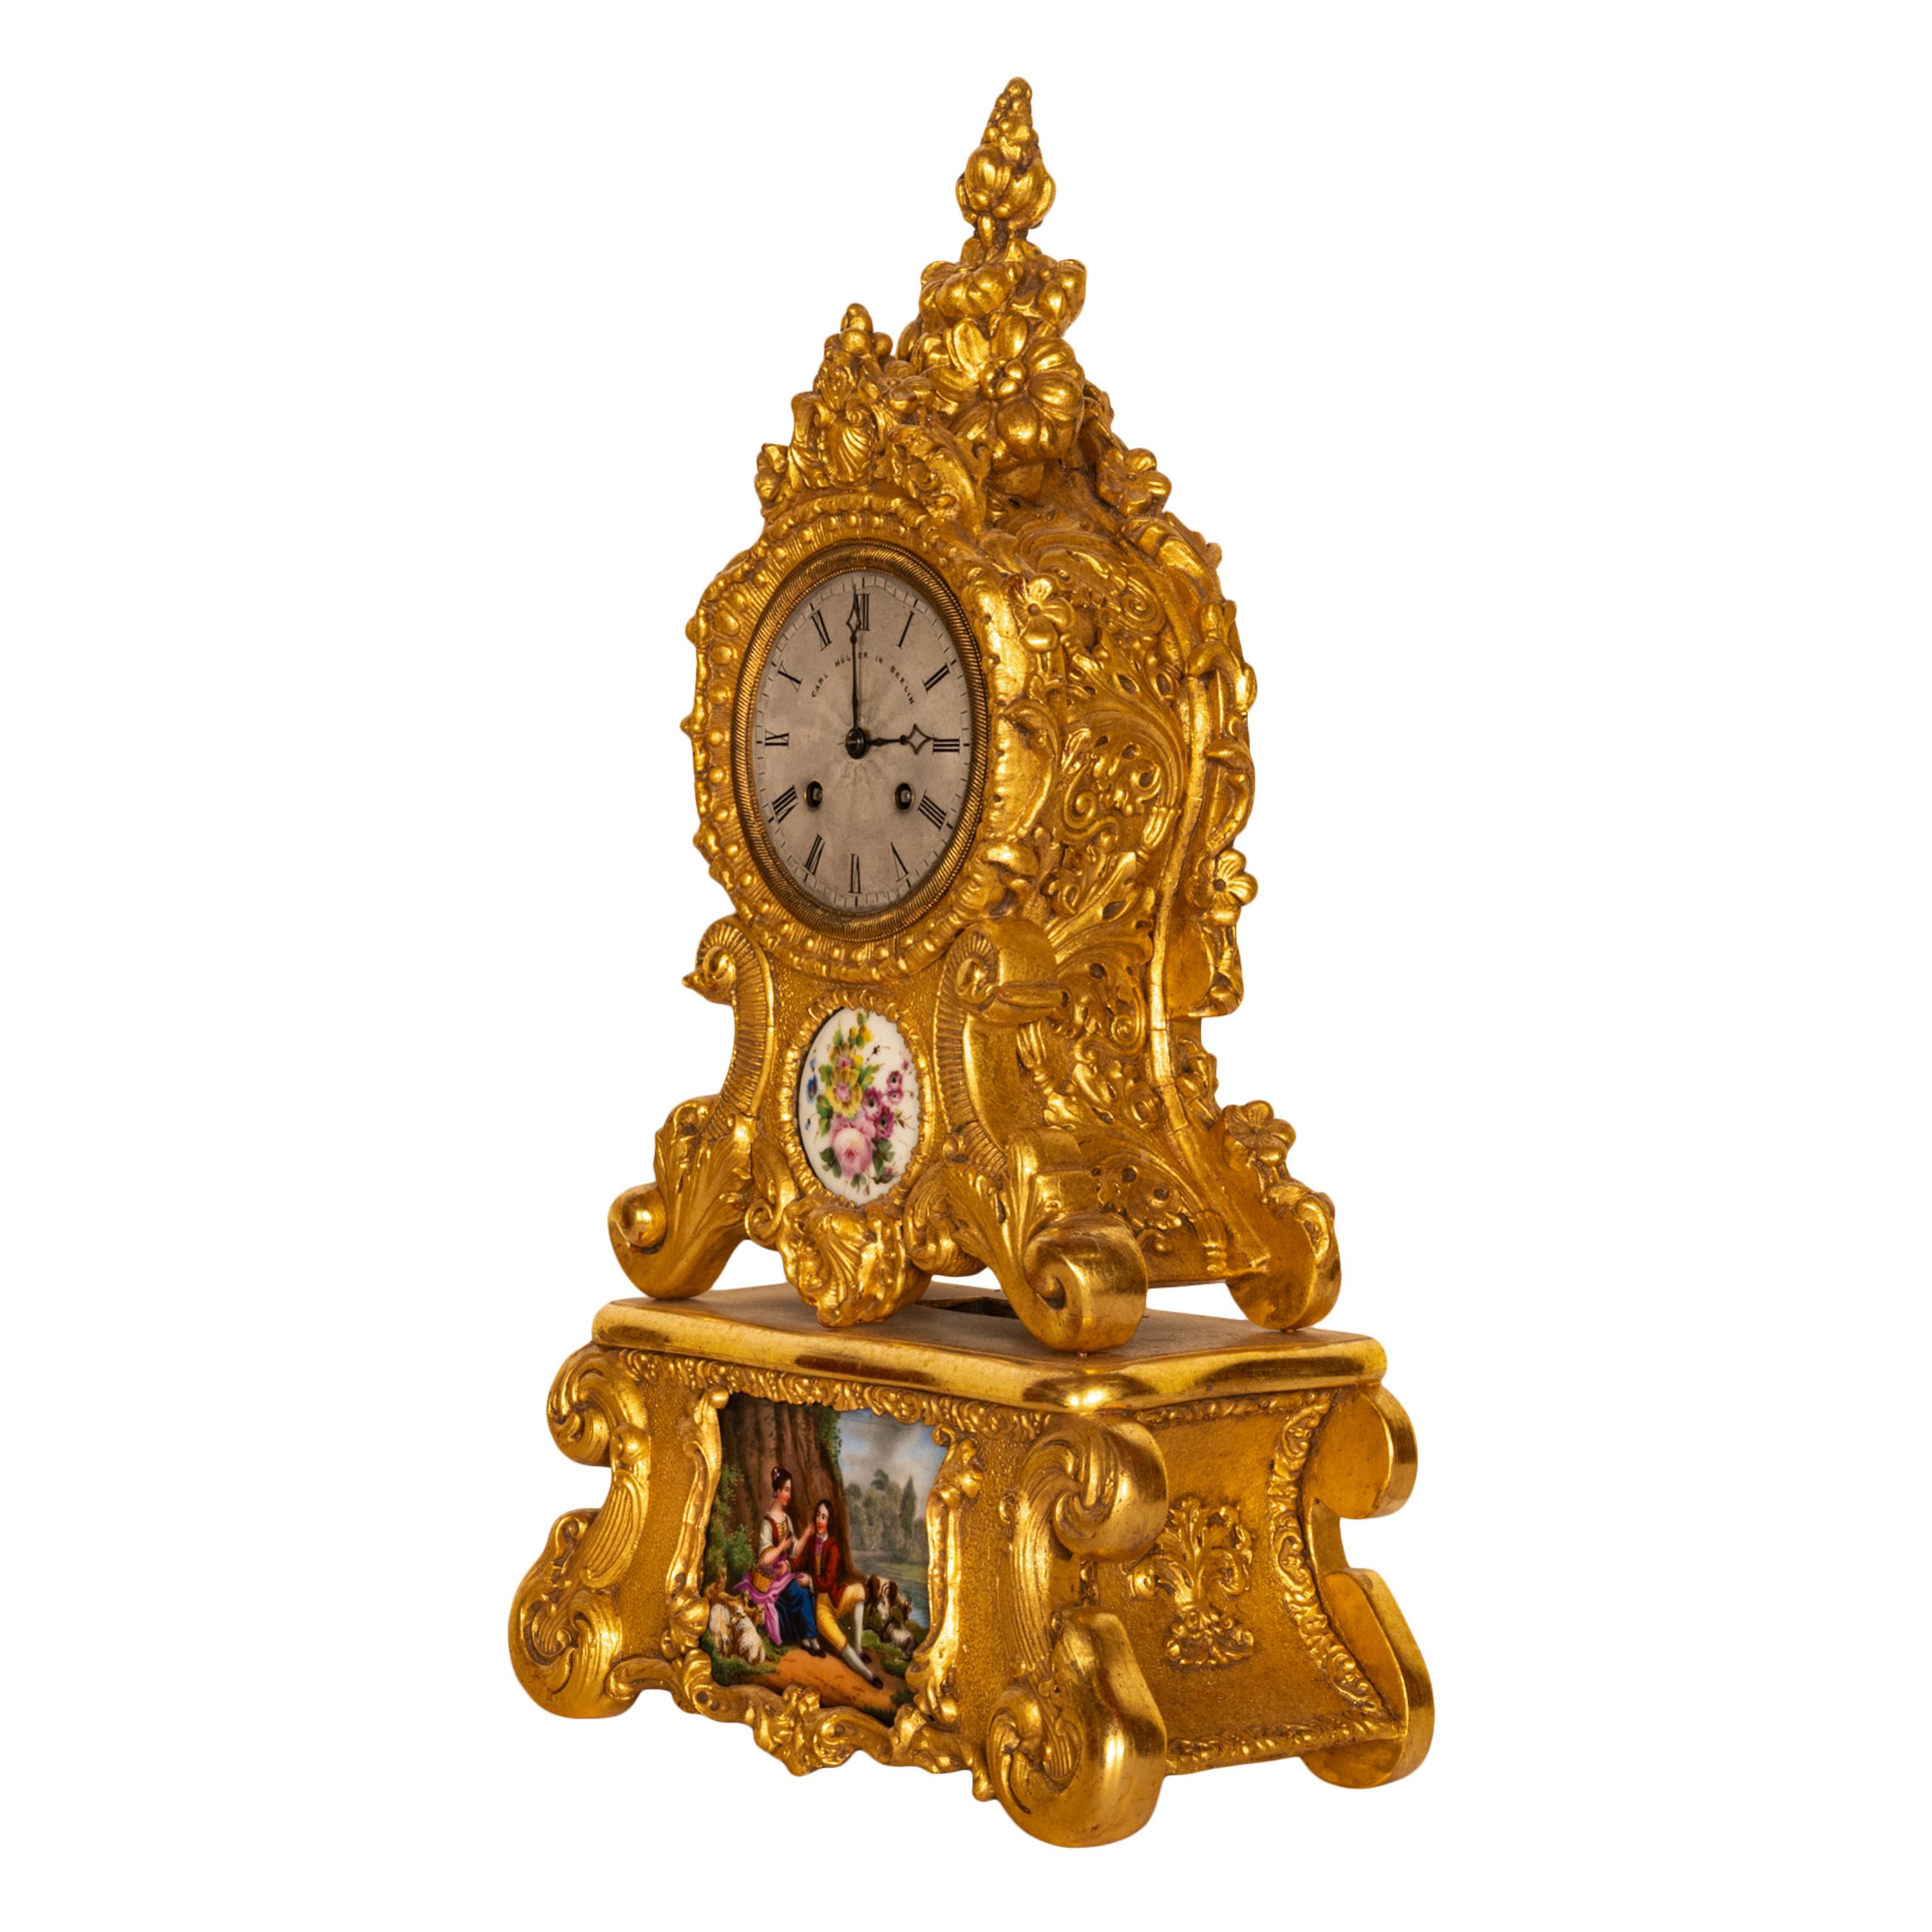 Fine Antique 19th Century French Rococo Gilded 8 Day Clock Sevres Porcelain 1830 In Good Condition For Sale In Portland, OR